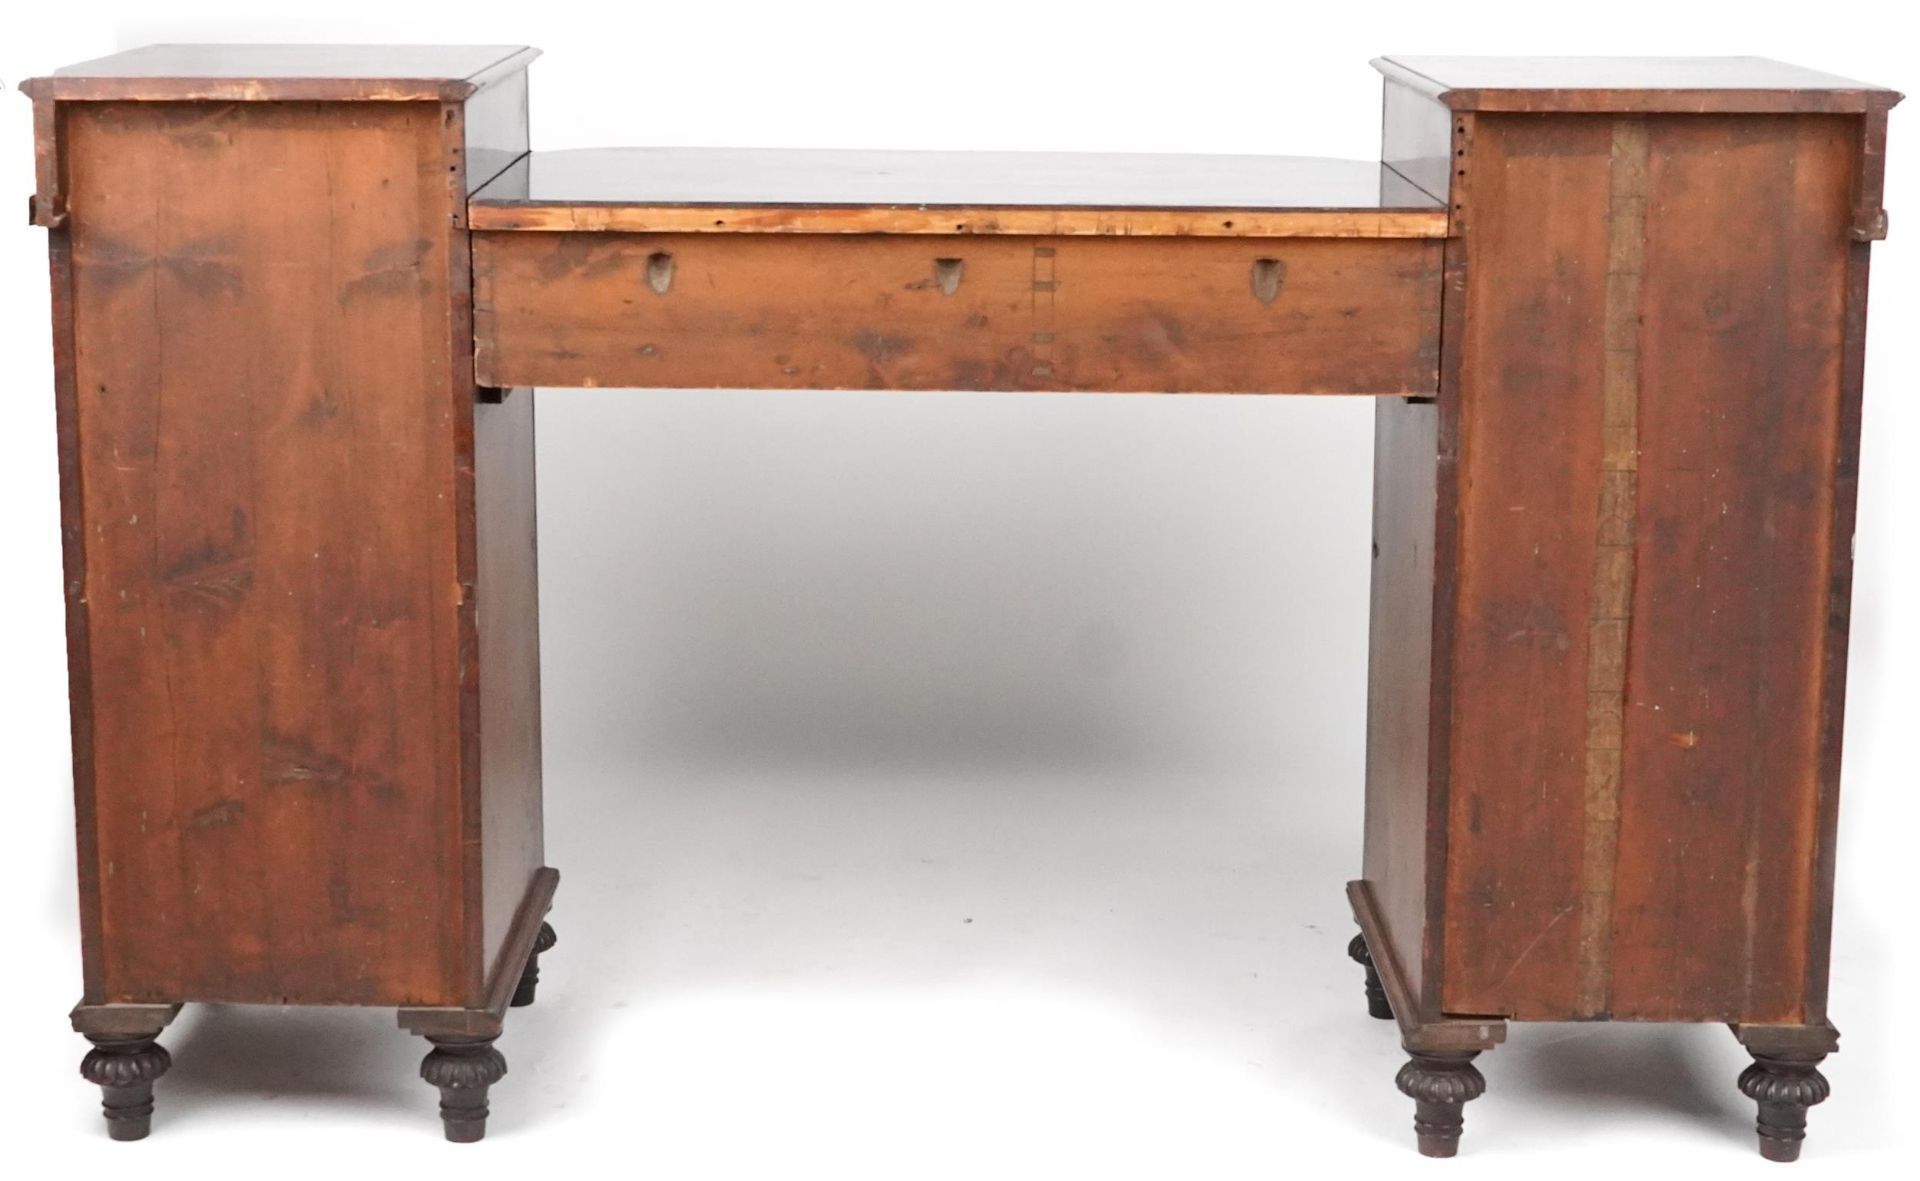 19th century mahogany twin pedestal sideboard with three drawers above a pair of cupboard doors - Image 3 of 3